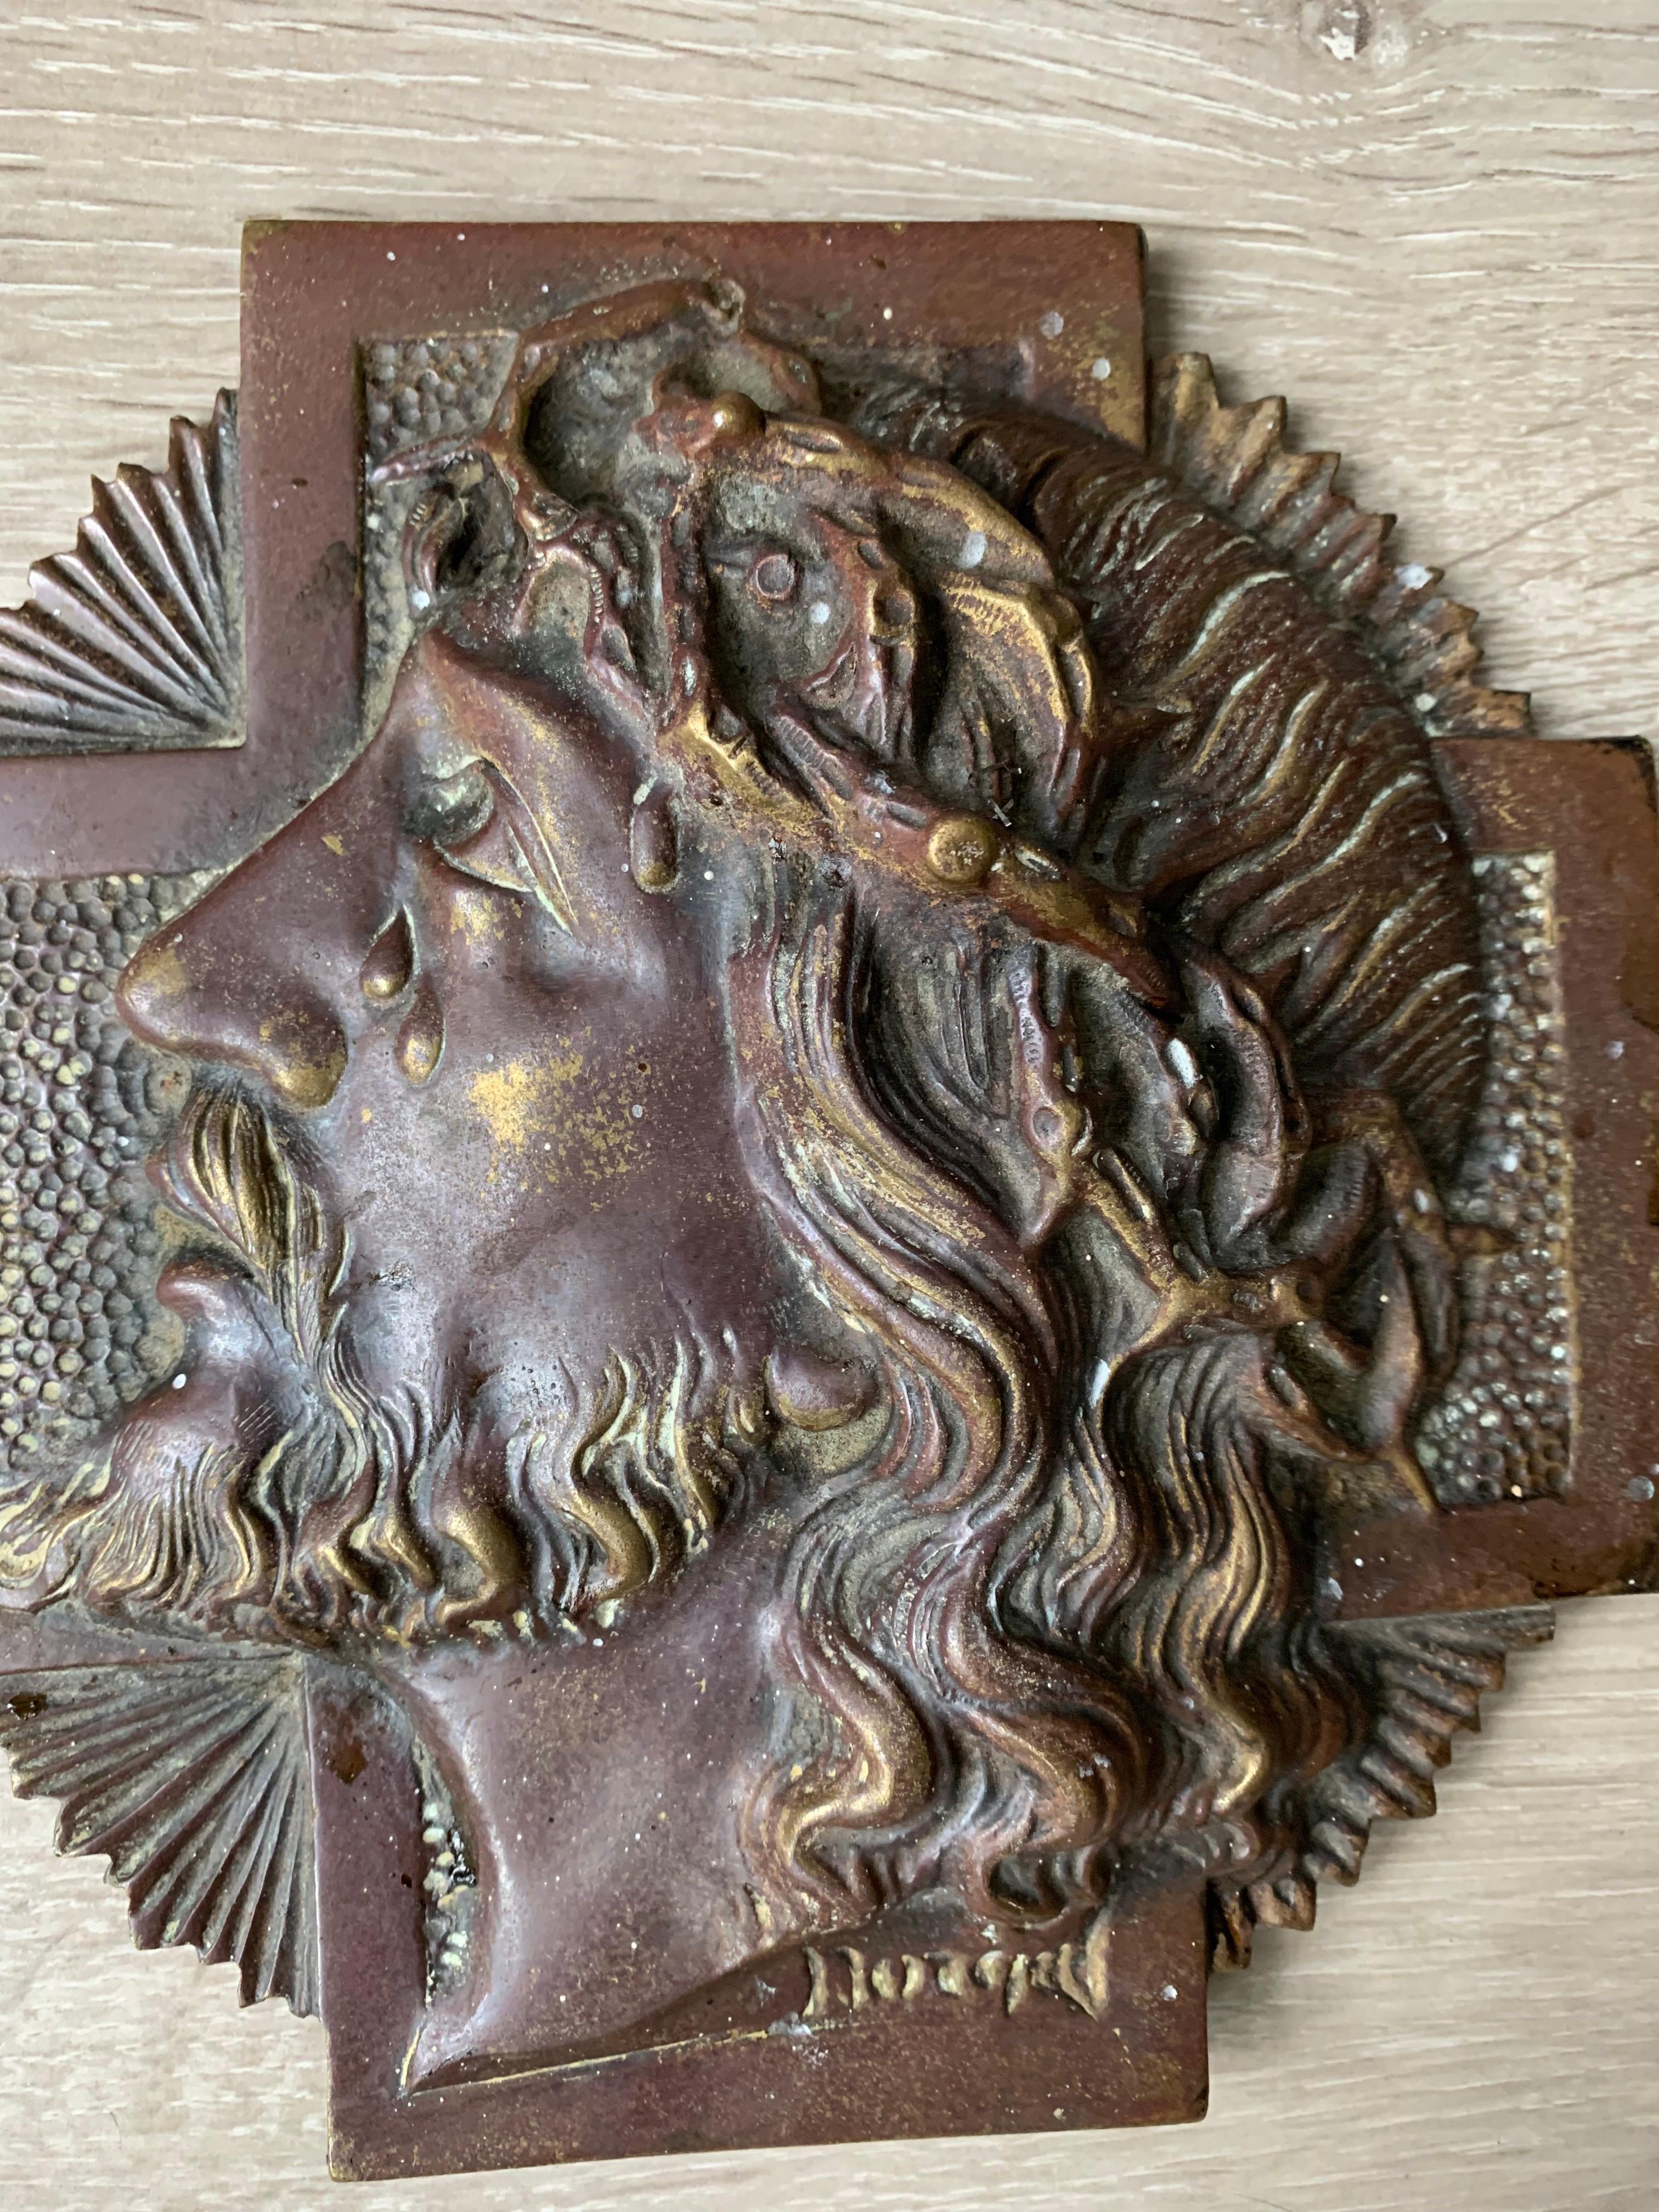 Small but impressive work of religious art.

Having sold many works of religious art we immediately noticed the tears that are on this Christ wall plaque. This 1920s Art Deco plaque by renowned artist Sylvain Norga of Belgium is one of only a very